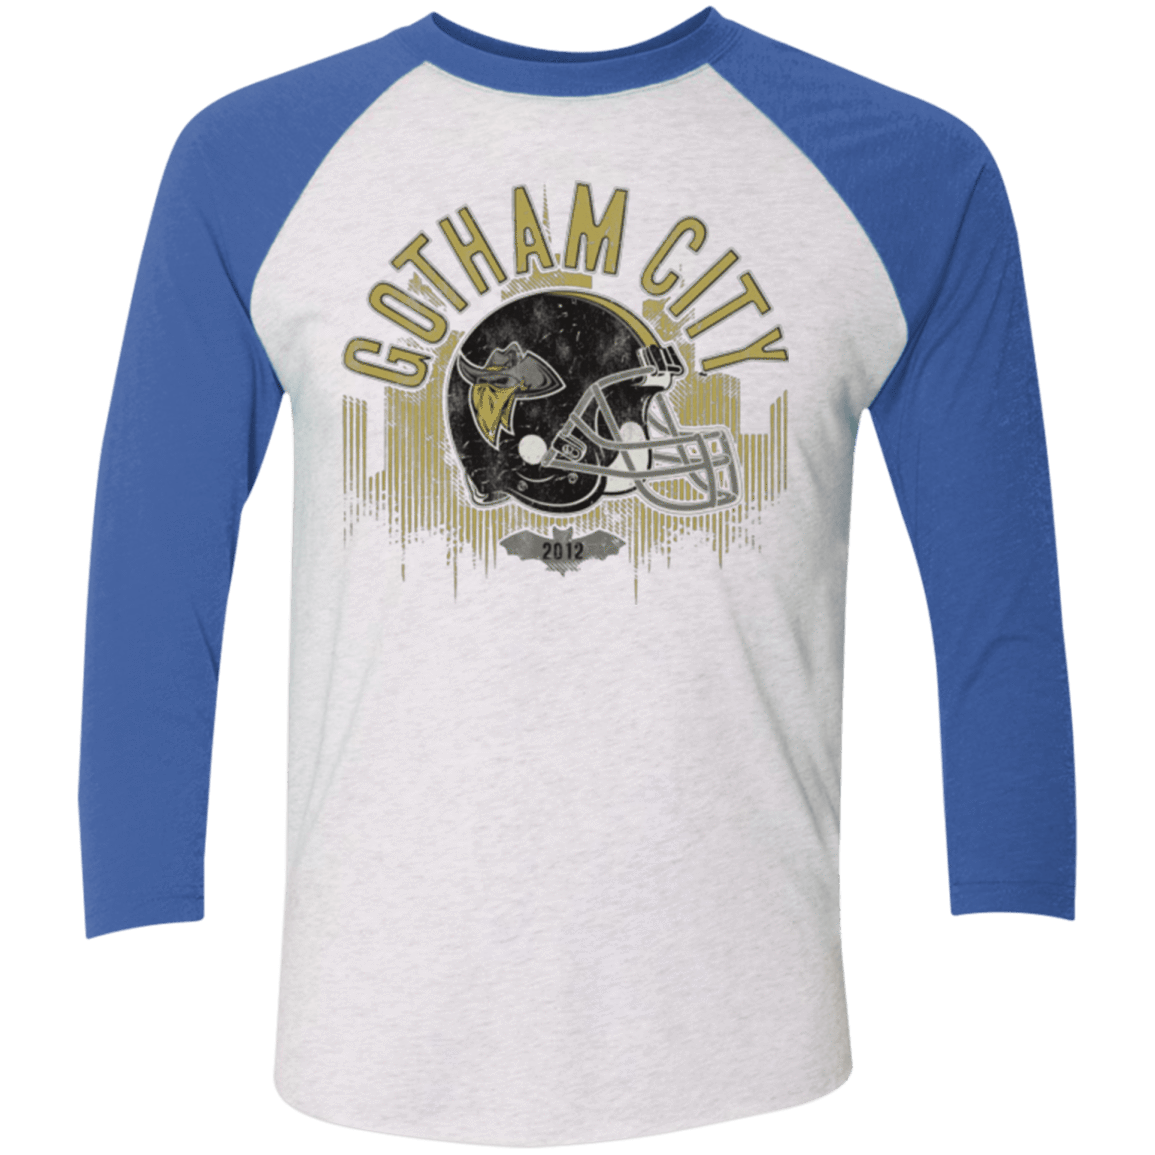 T-Shirts Heather White/Vintage Royal / X-Small Gotham Rogues Men's Triblend 3/4 Sleeve